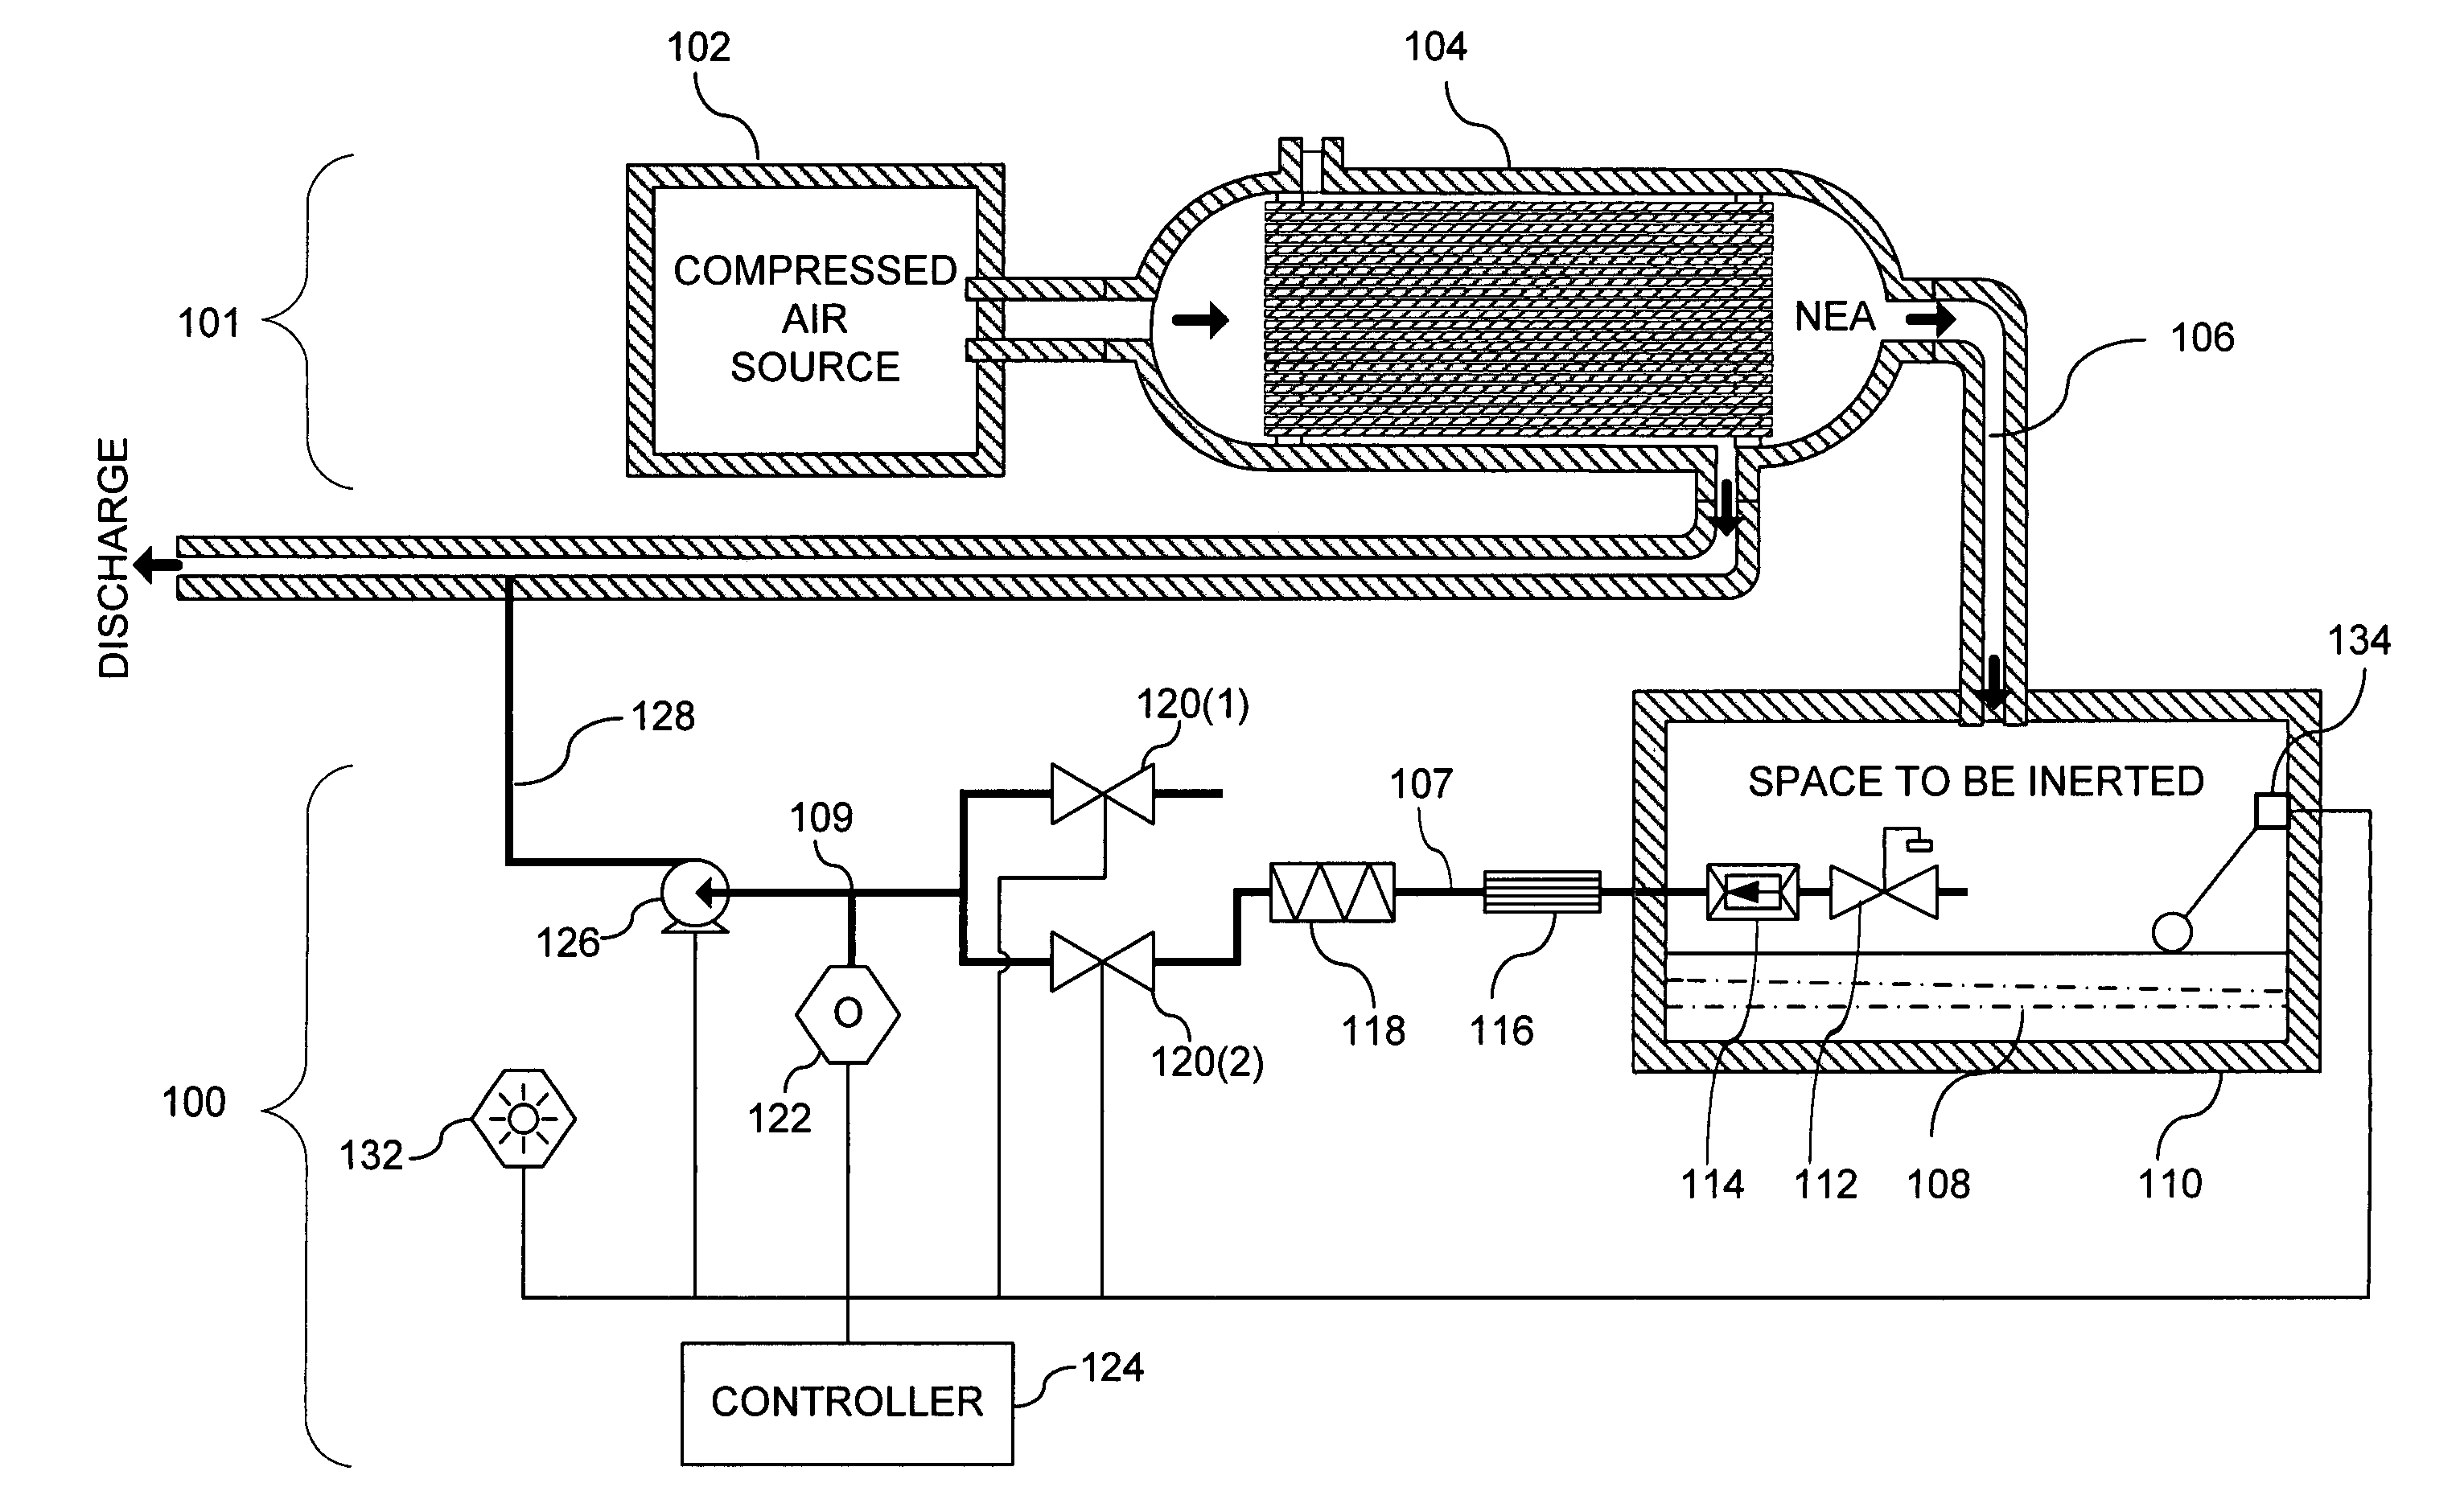 System and method for monitoring the performance of an inert gas distribution system